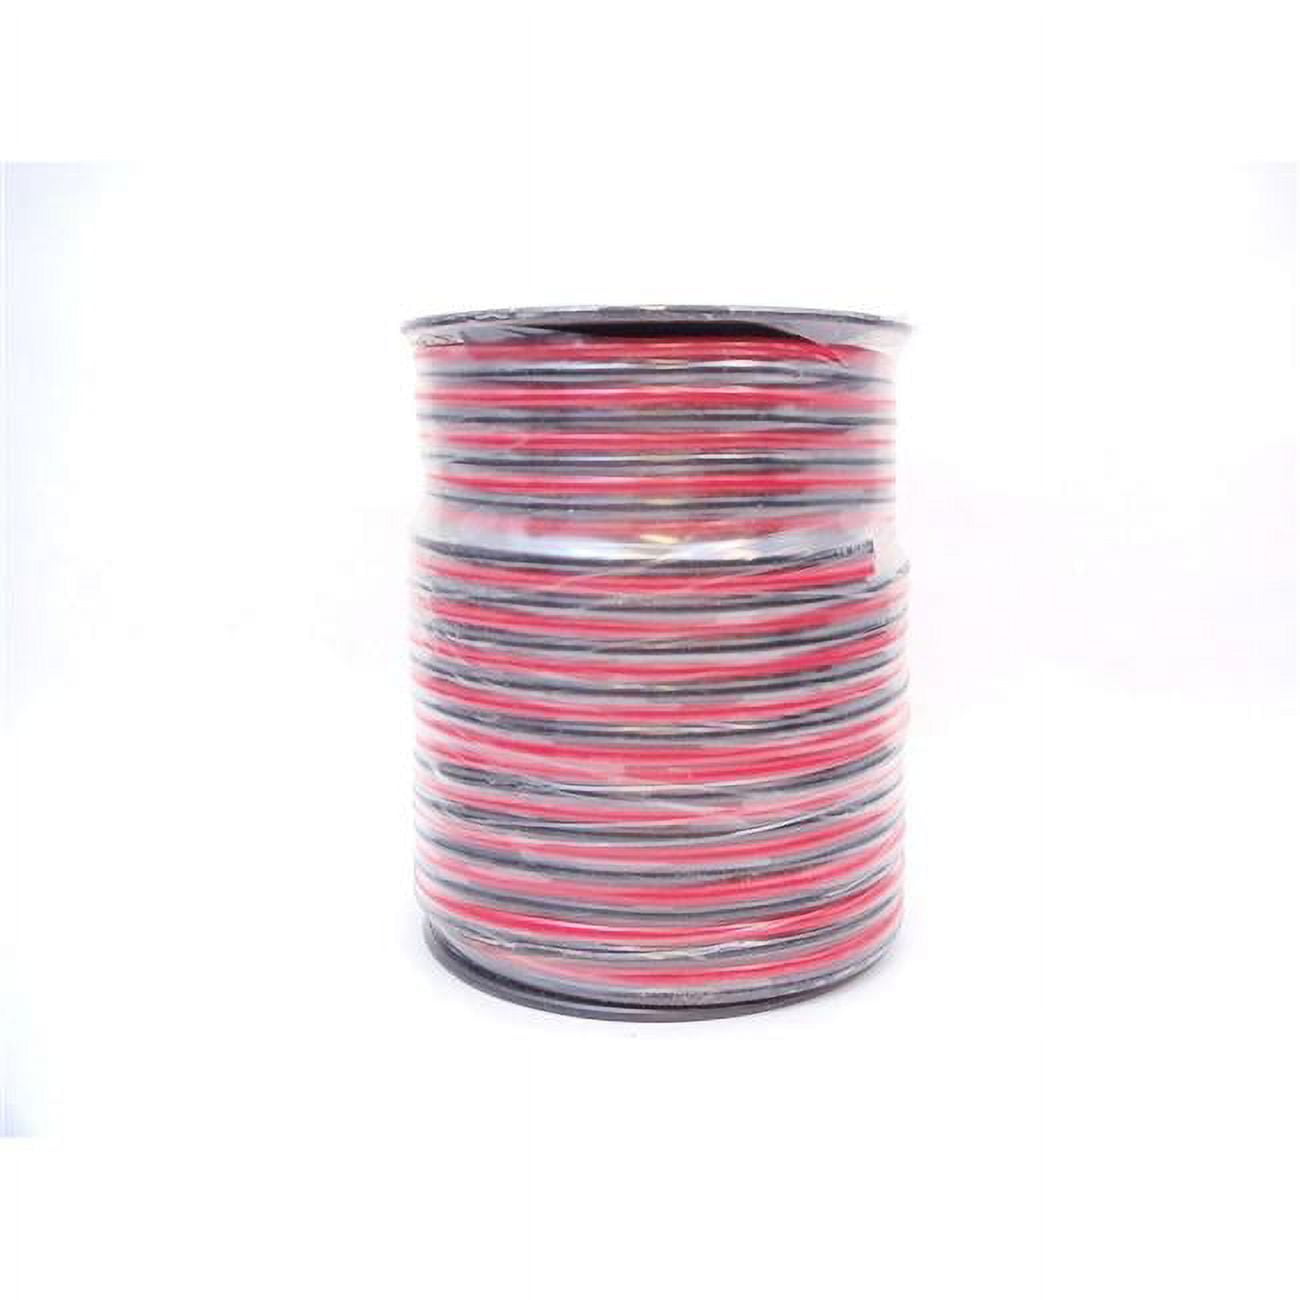 Picture of Twinpoint 14RB1 Workman 100 ft. Spool of 14 Gauge DC Zip Wire, Red & Black